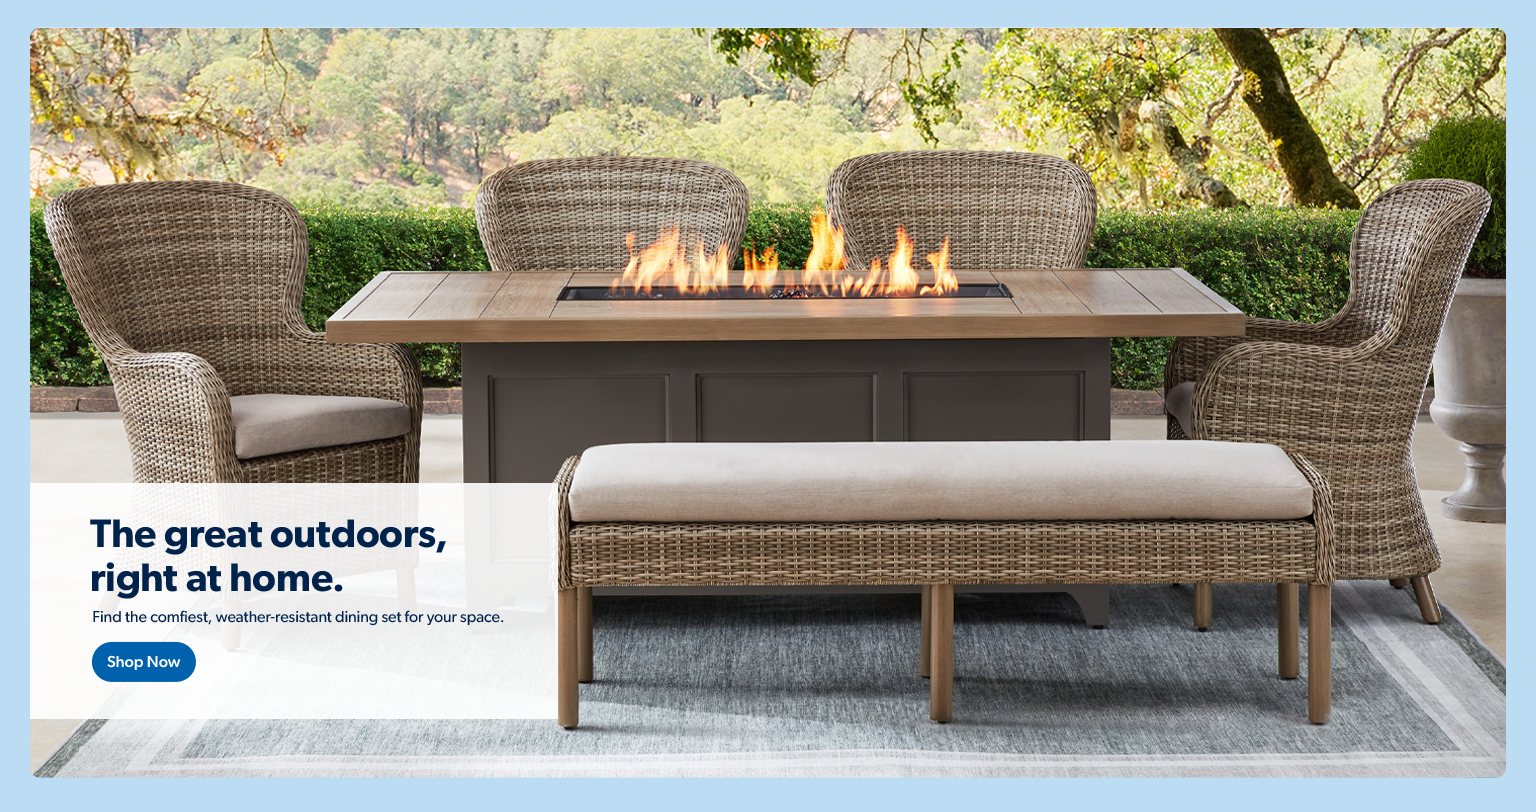 The great outdoors, right at home. Find the comfiest, weather-resistant dining set for your space. Shop now.